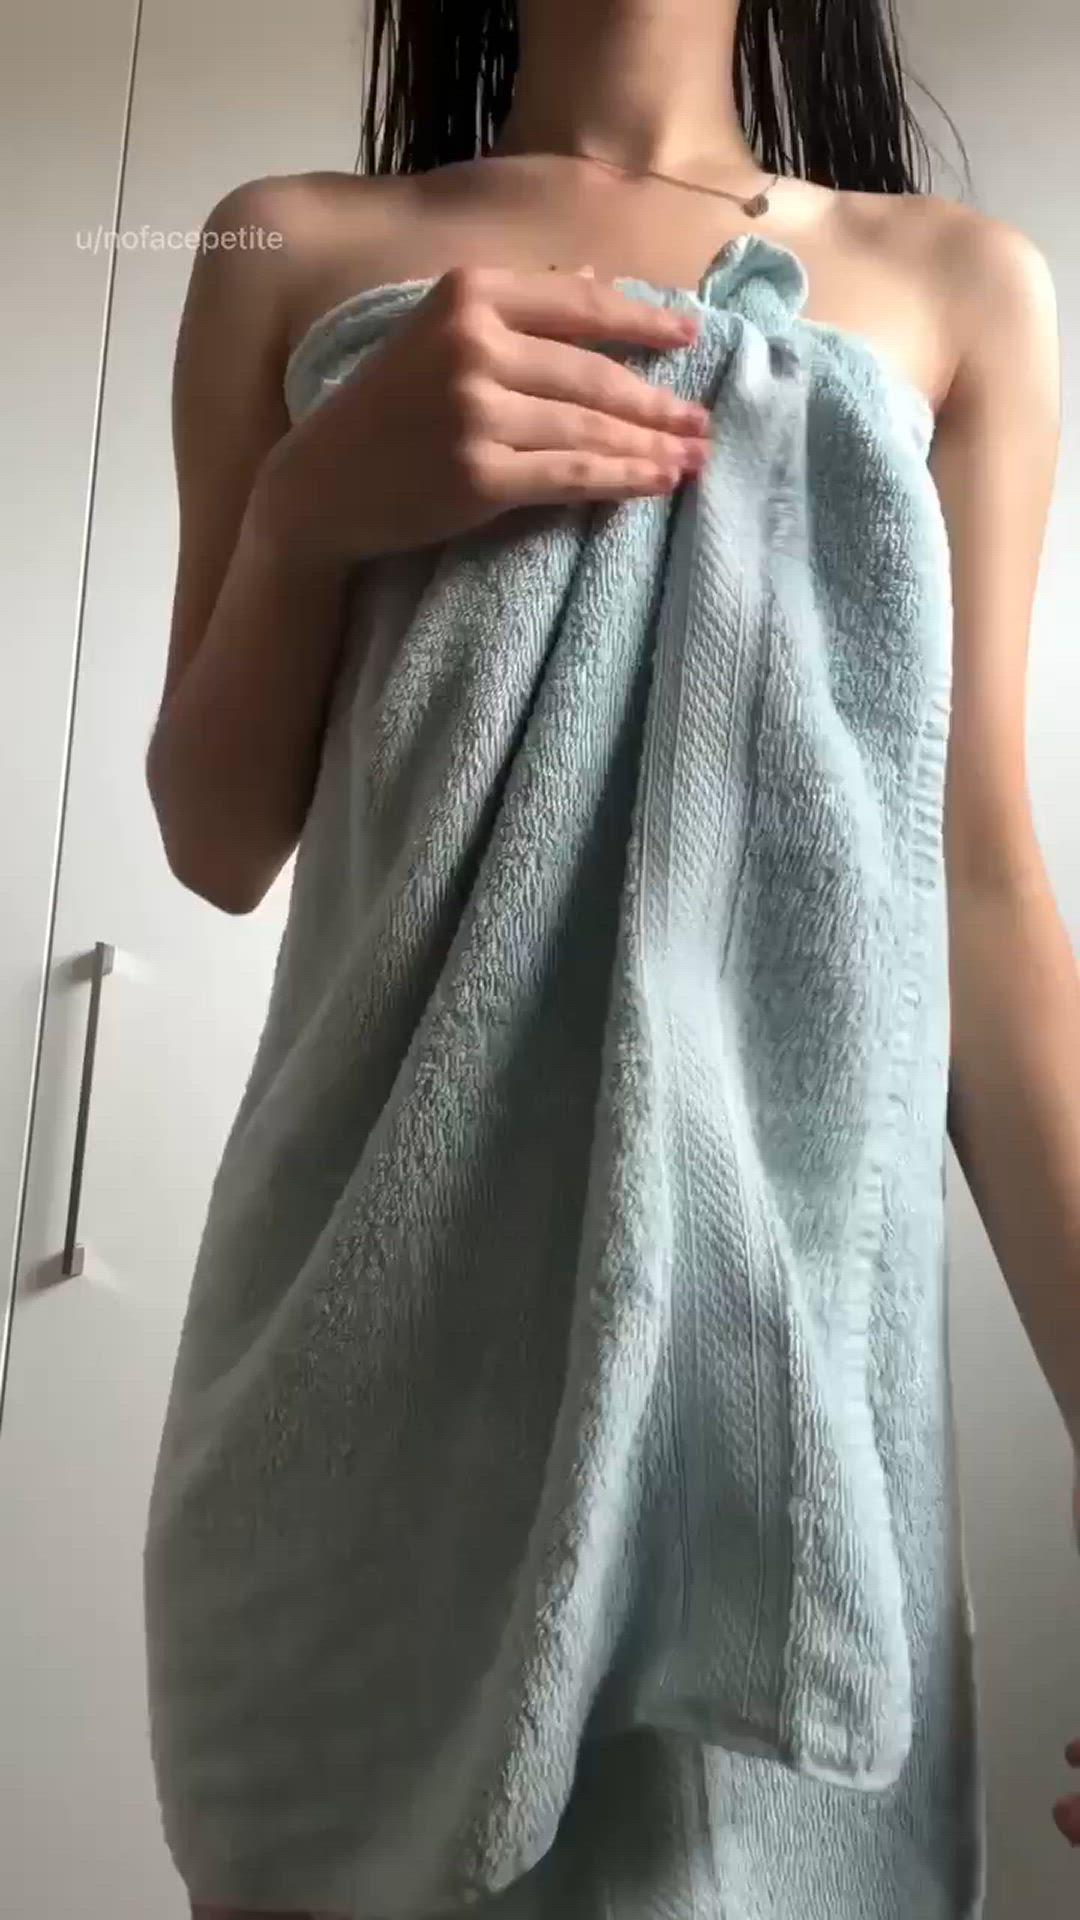 Boobs porn video with onlyfans model nofacepetiteee <strong>@nofacepetite</strong>